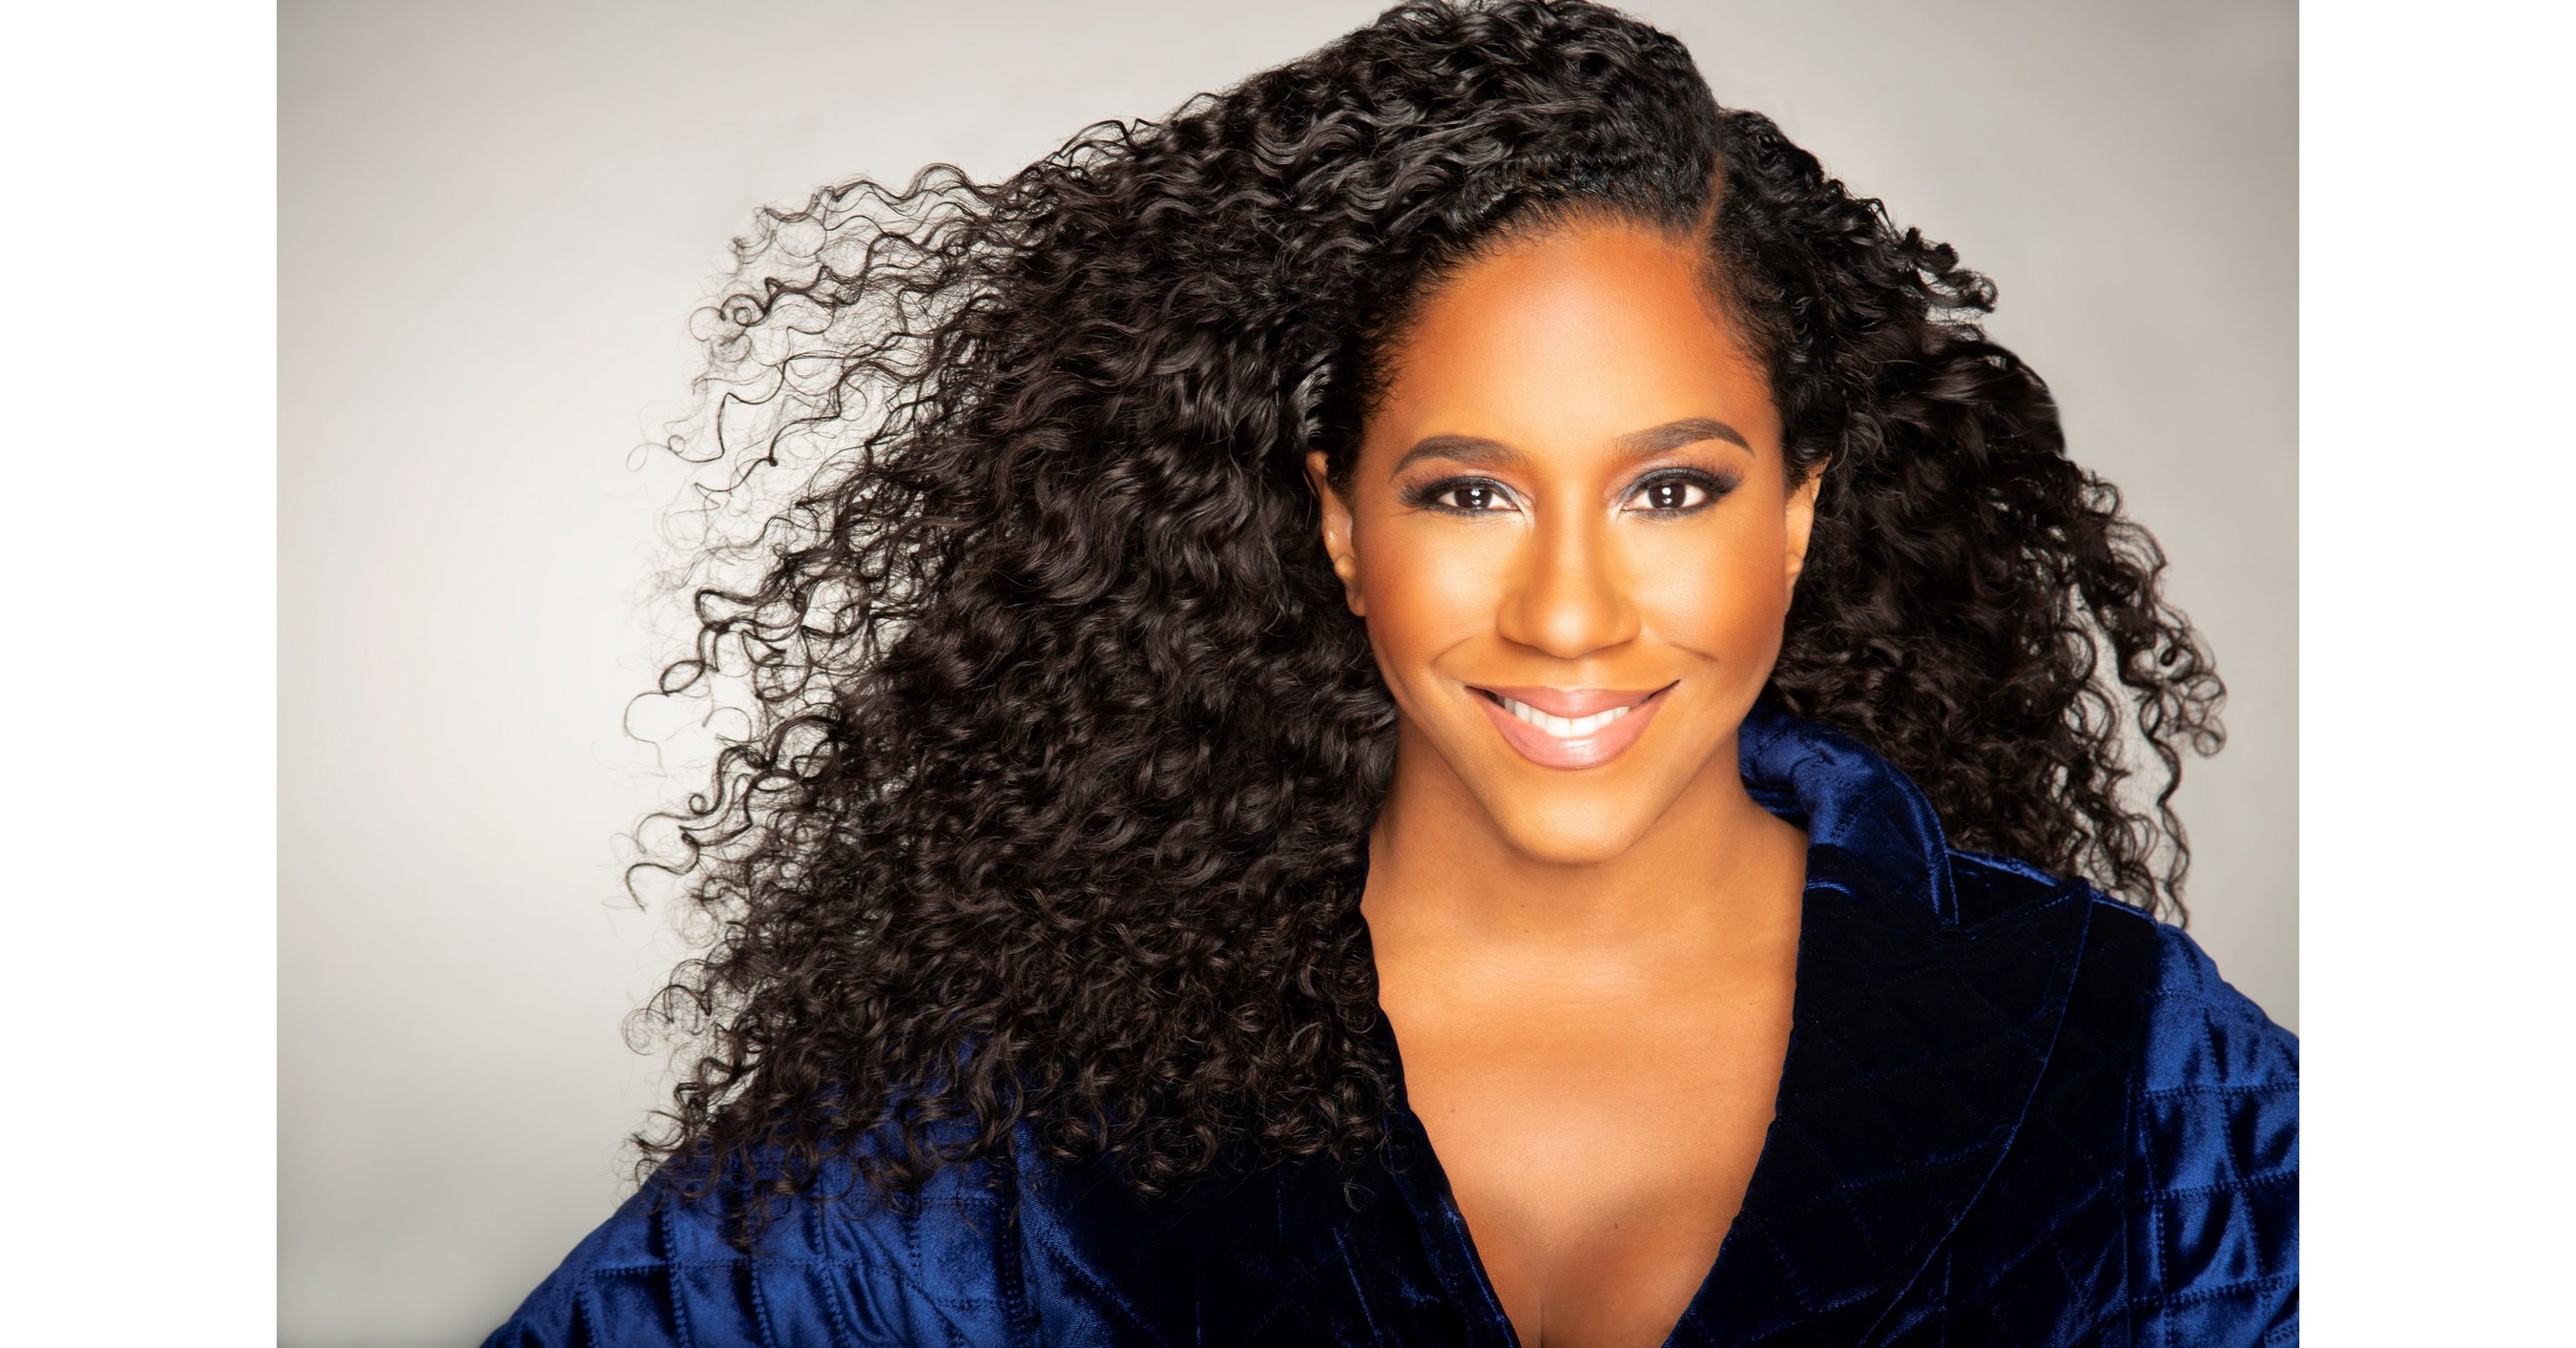 Mahisha Dellinger, Founder of Leading Natural Hair Care Brand, CURLS, Accepted Into Forbes Business Council